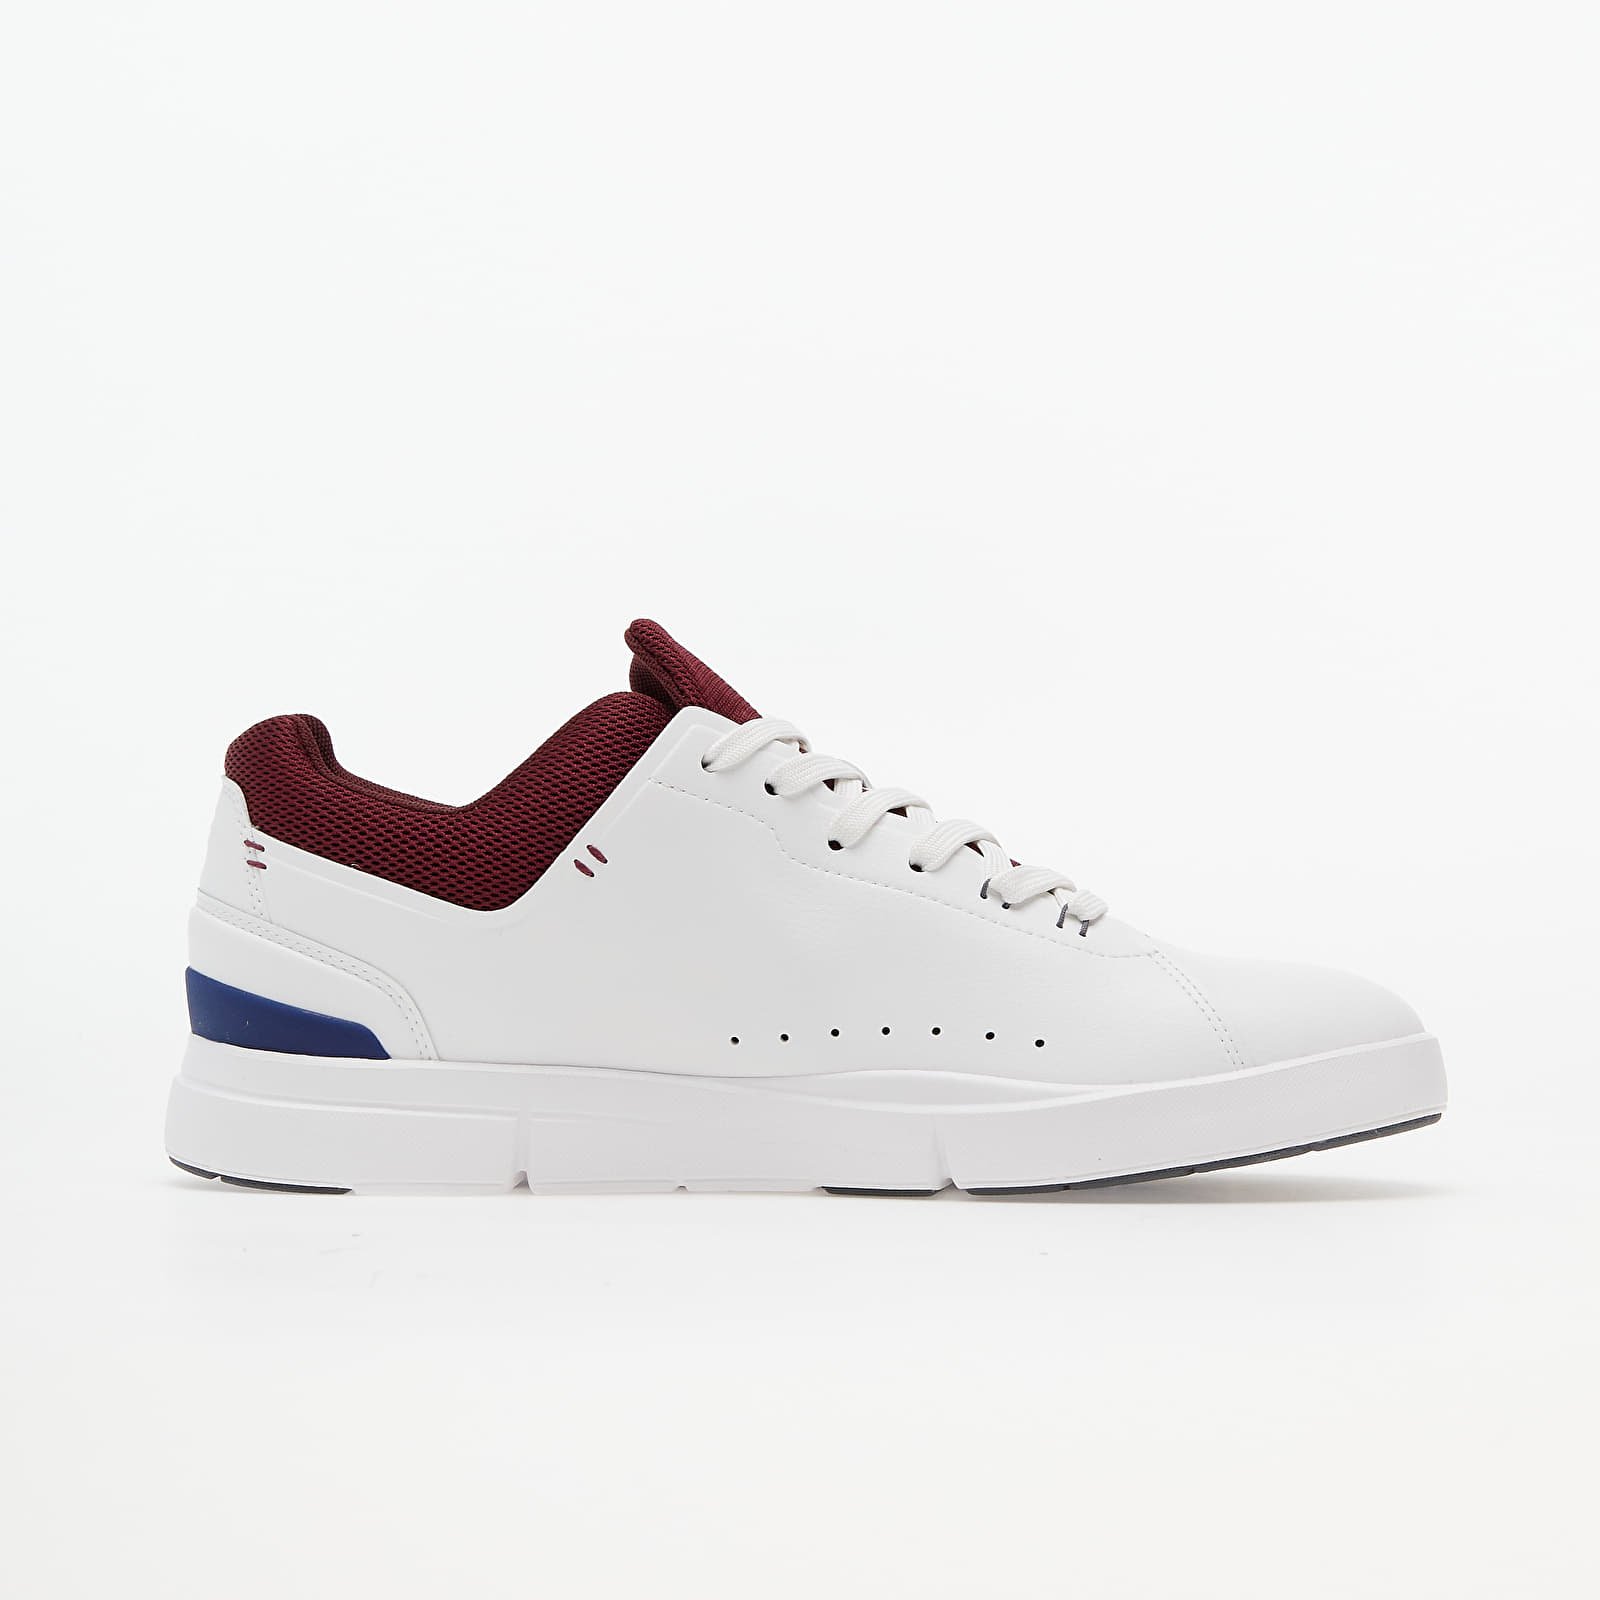 The Roger Advantage "White/ Mulberry"